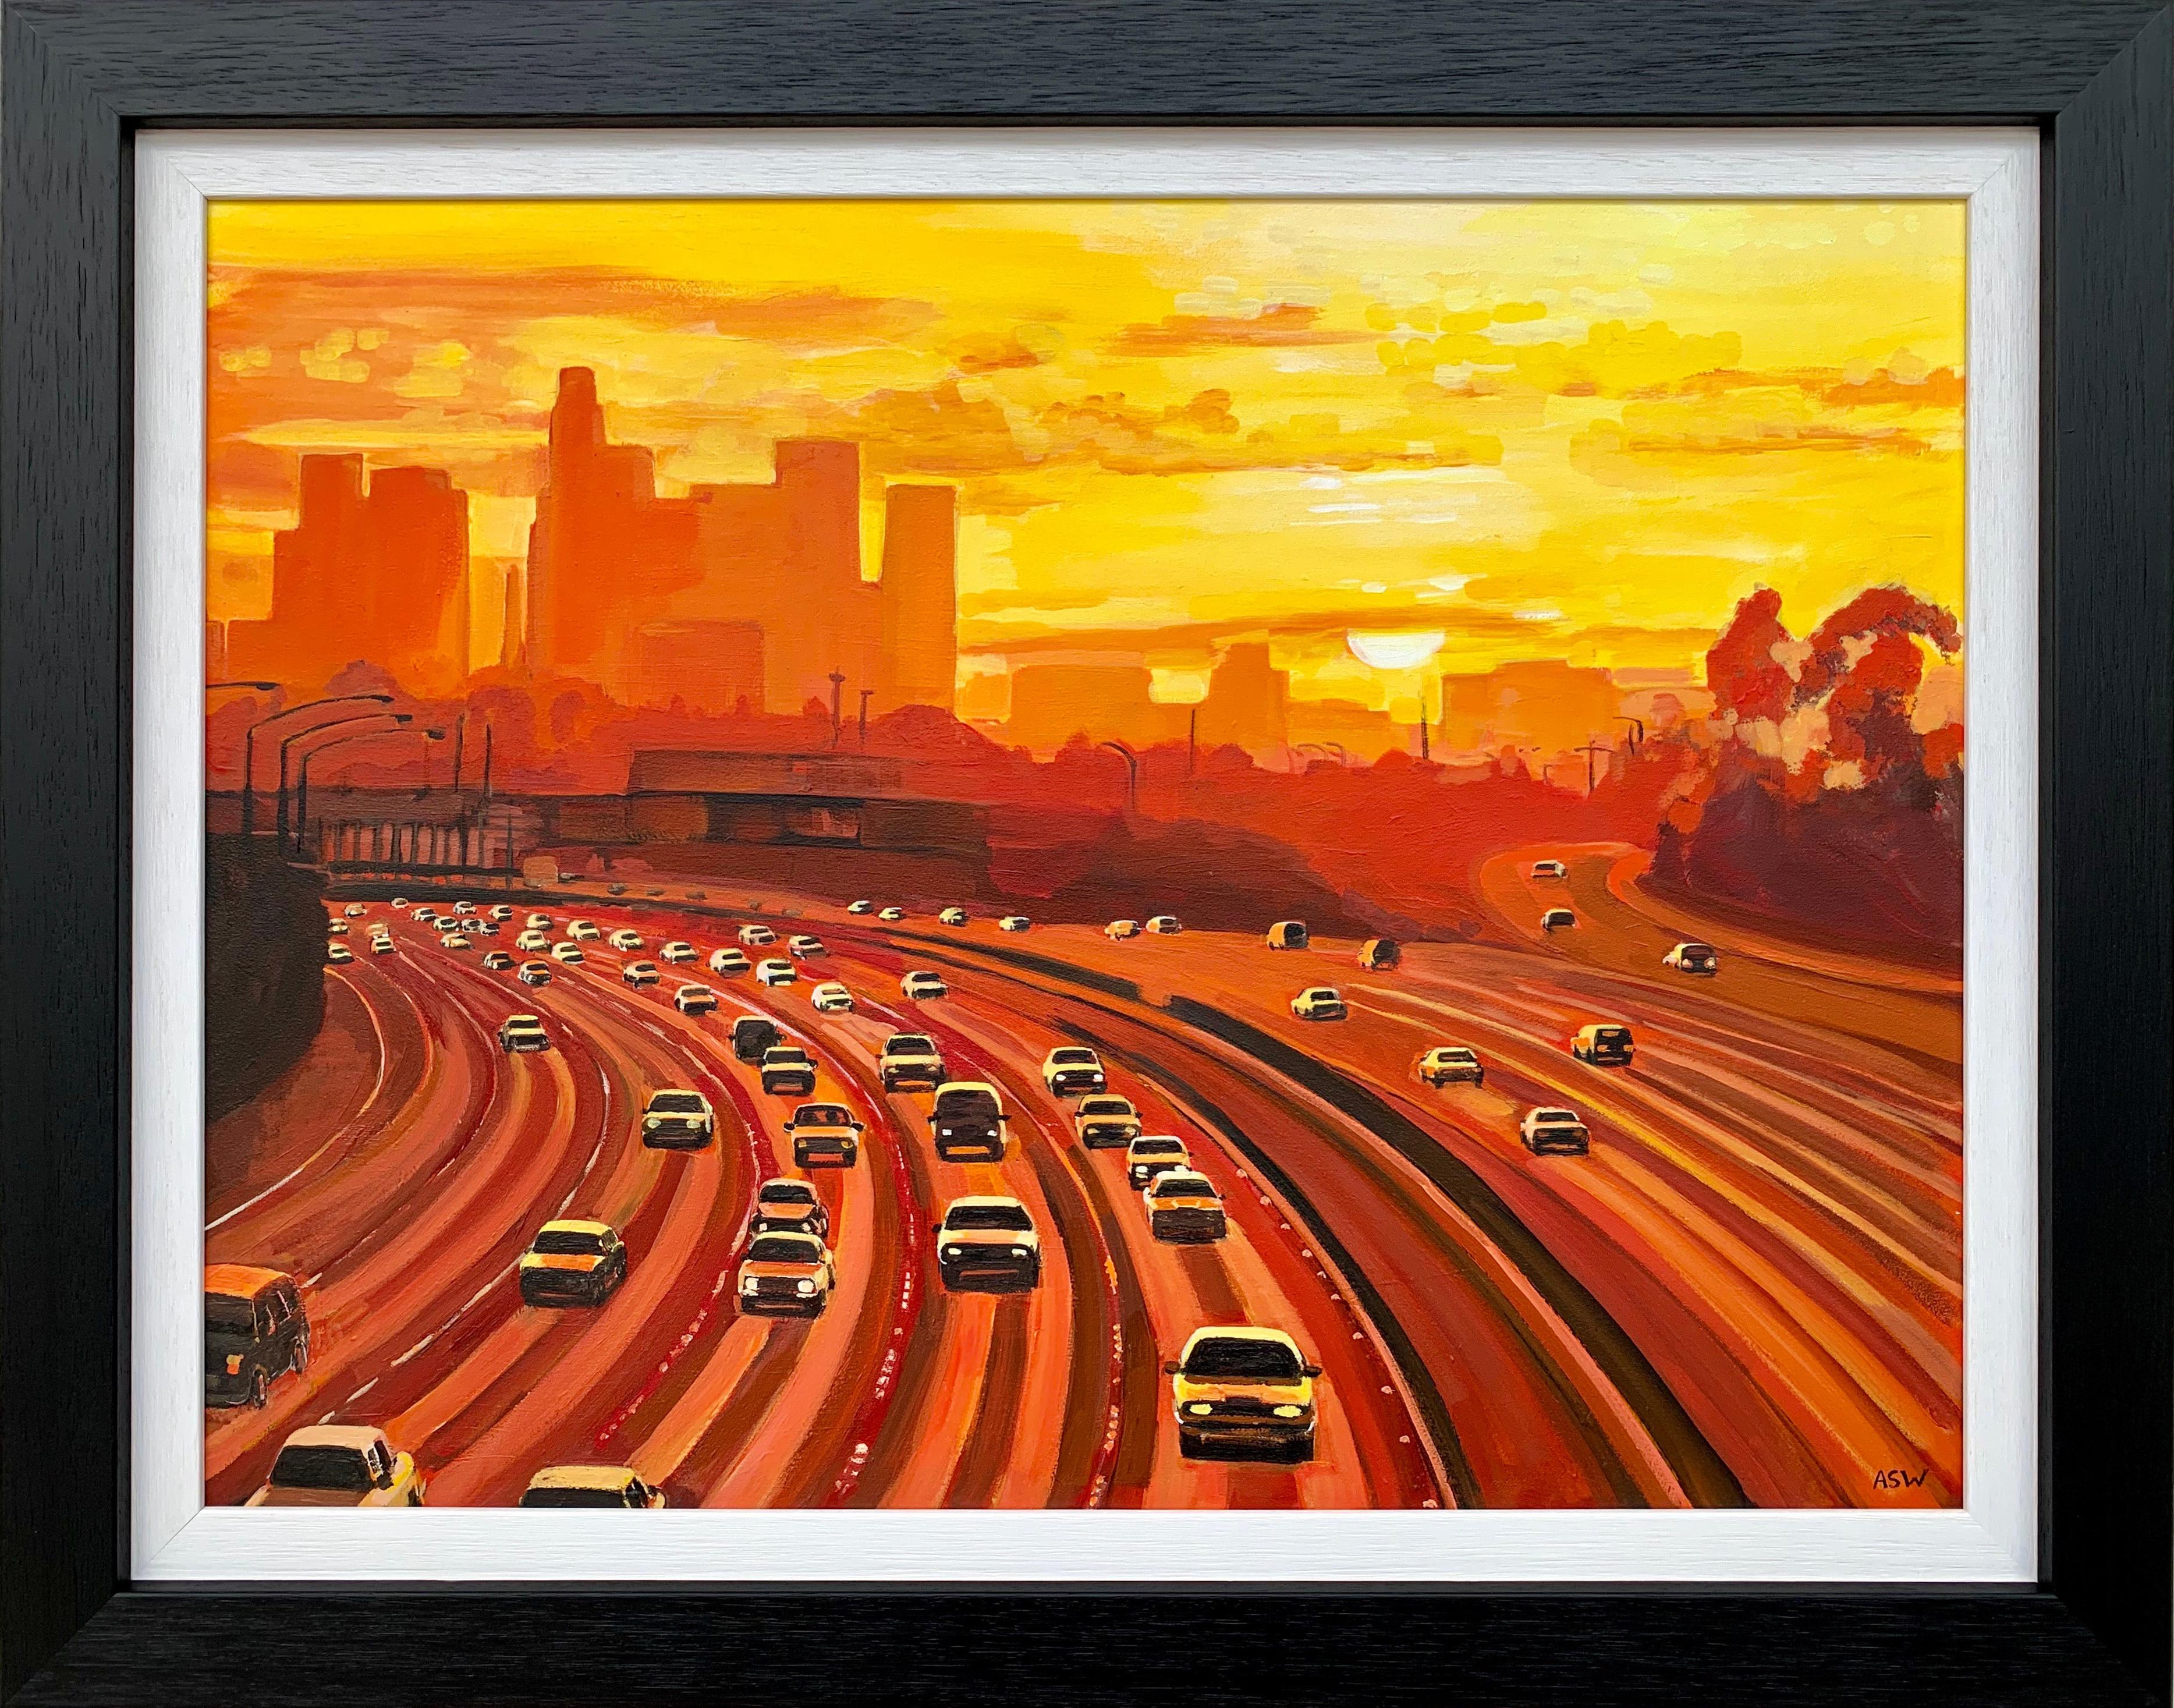 Angela Wakefield Landscape Painting - Painting of Los Angeles Highway Sunset California by Collectible British Artist